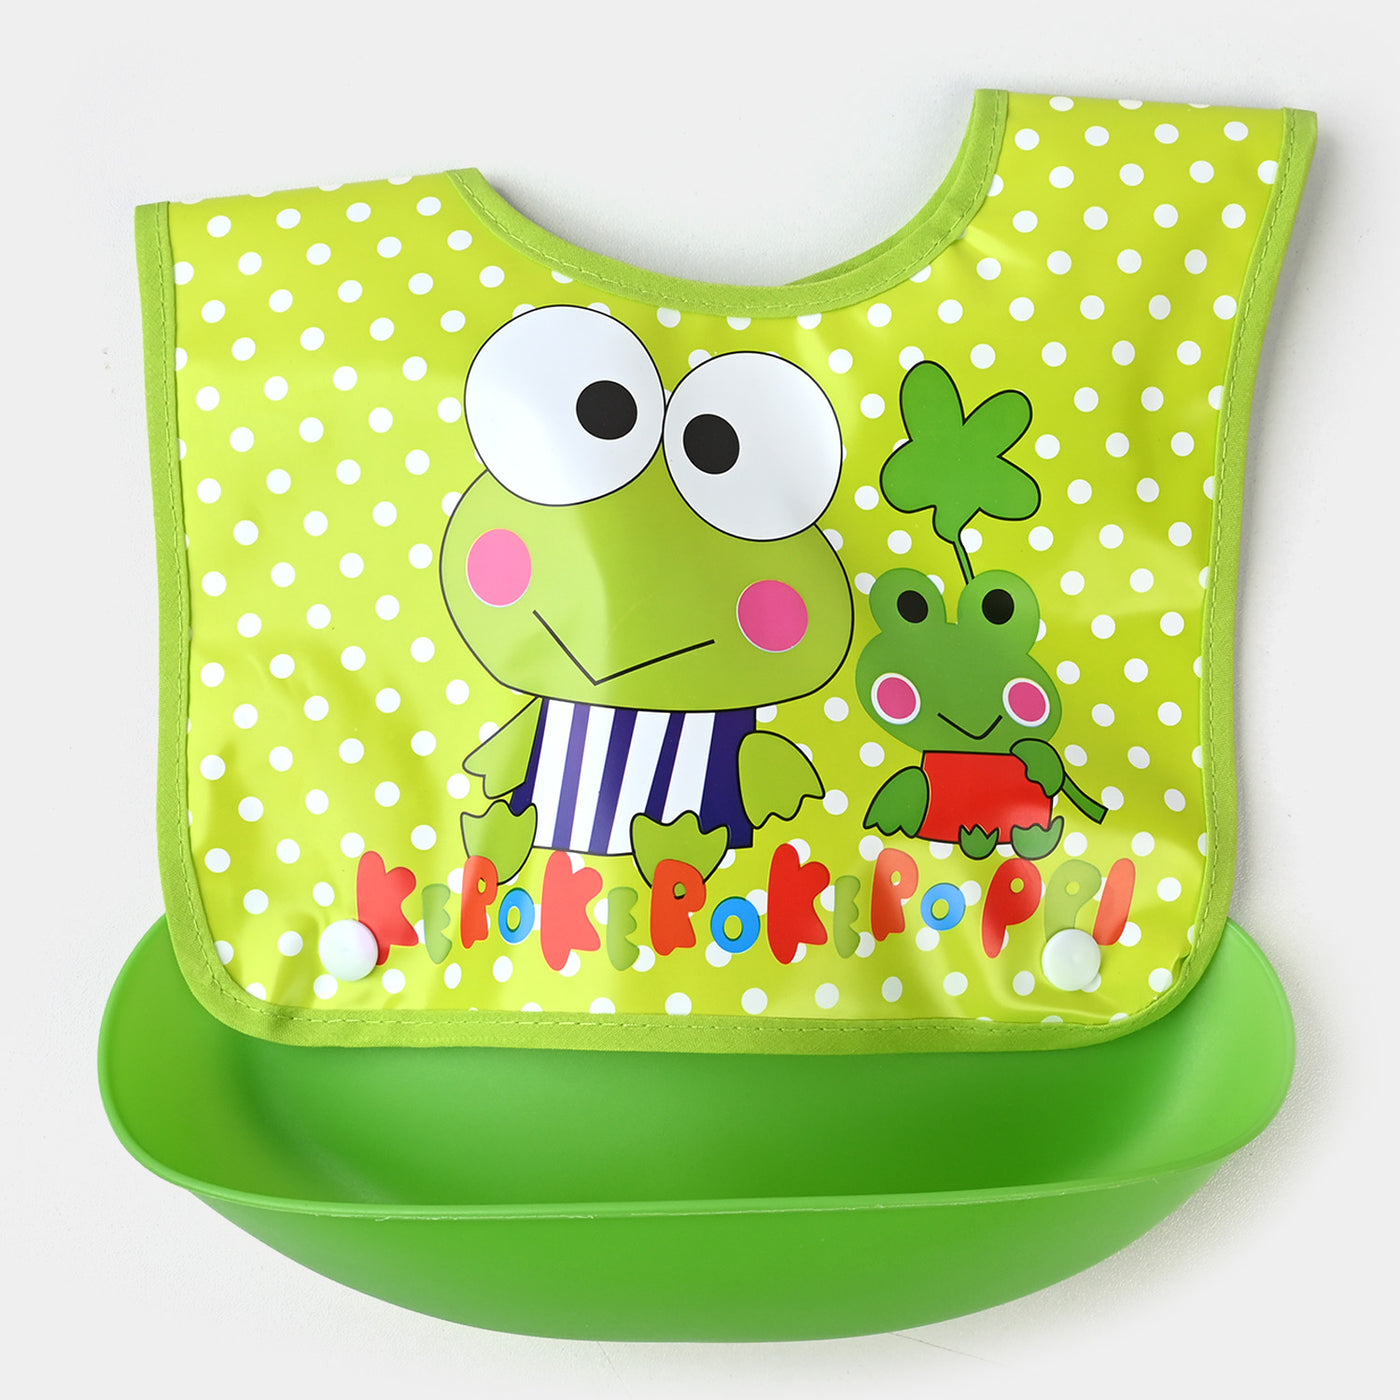 PLASTIC BIB WITH HOLDER FOR BABIES